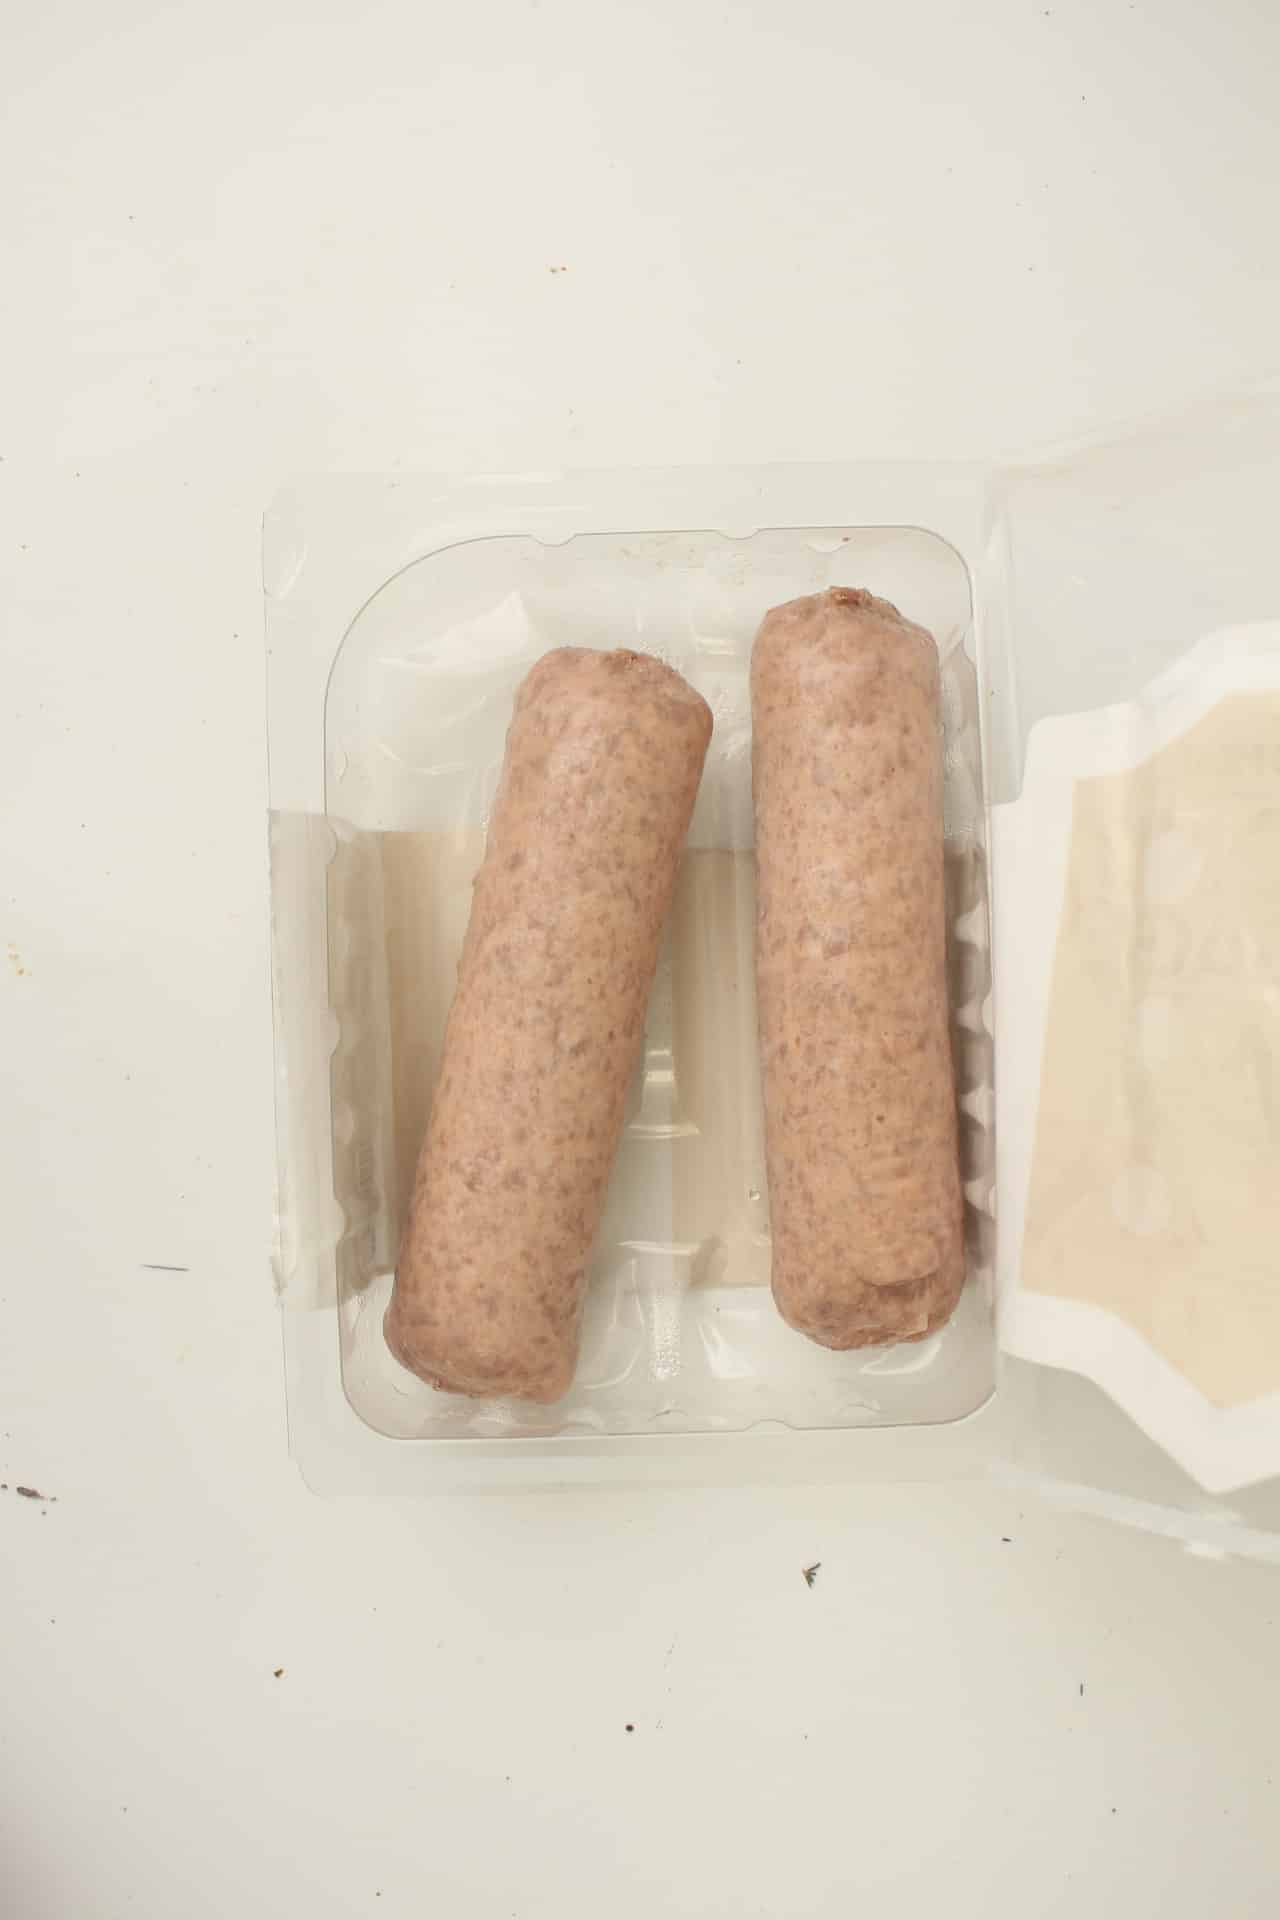 Air fryer Beyond Sausage (frozen) in the package
